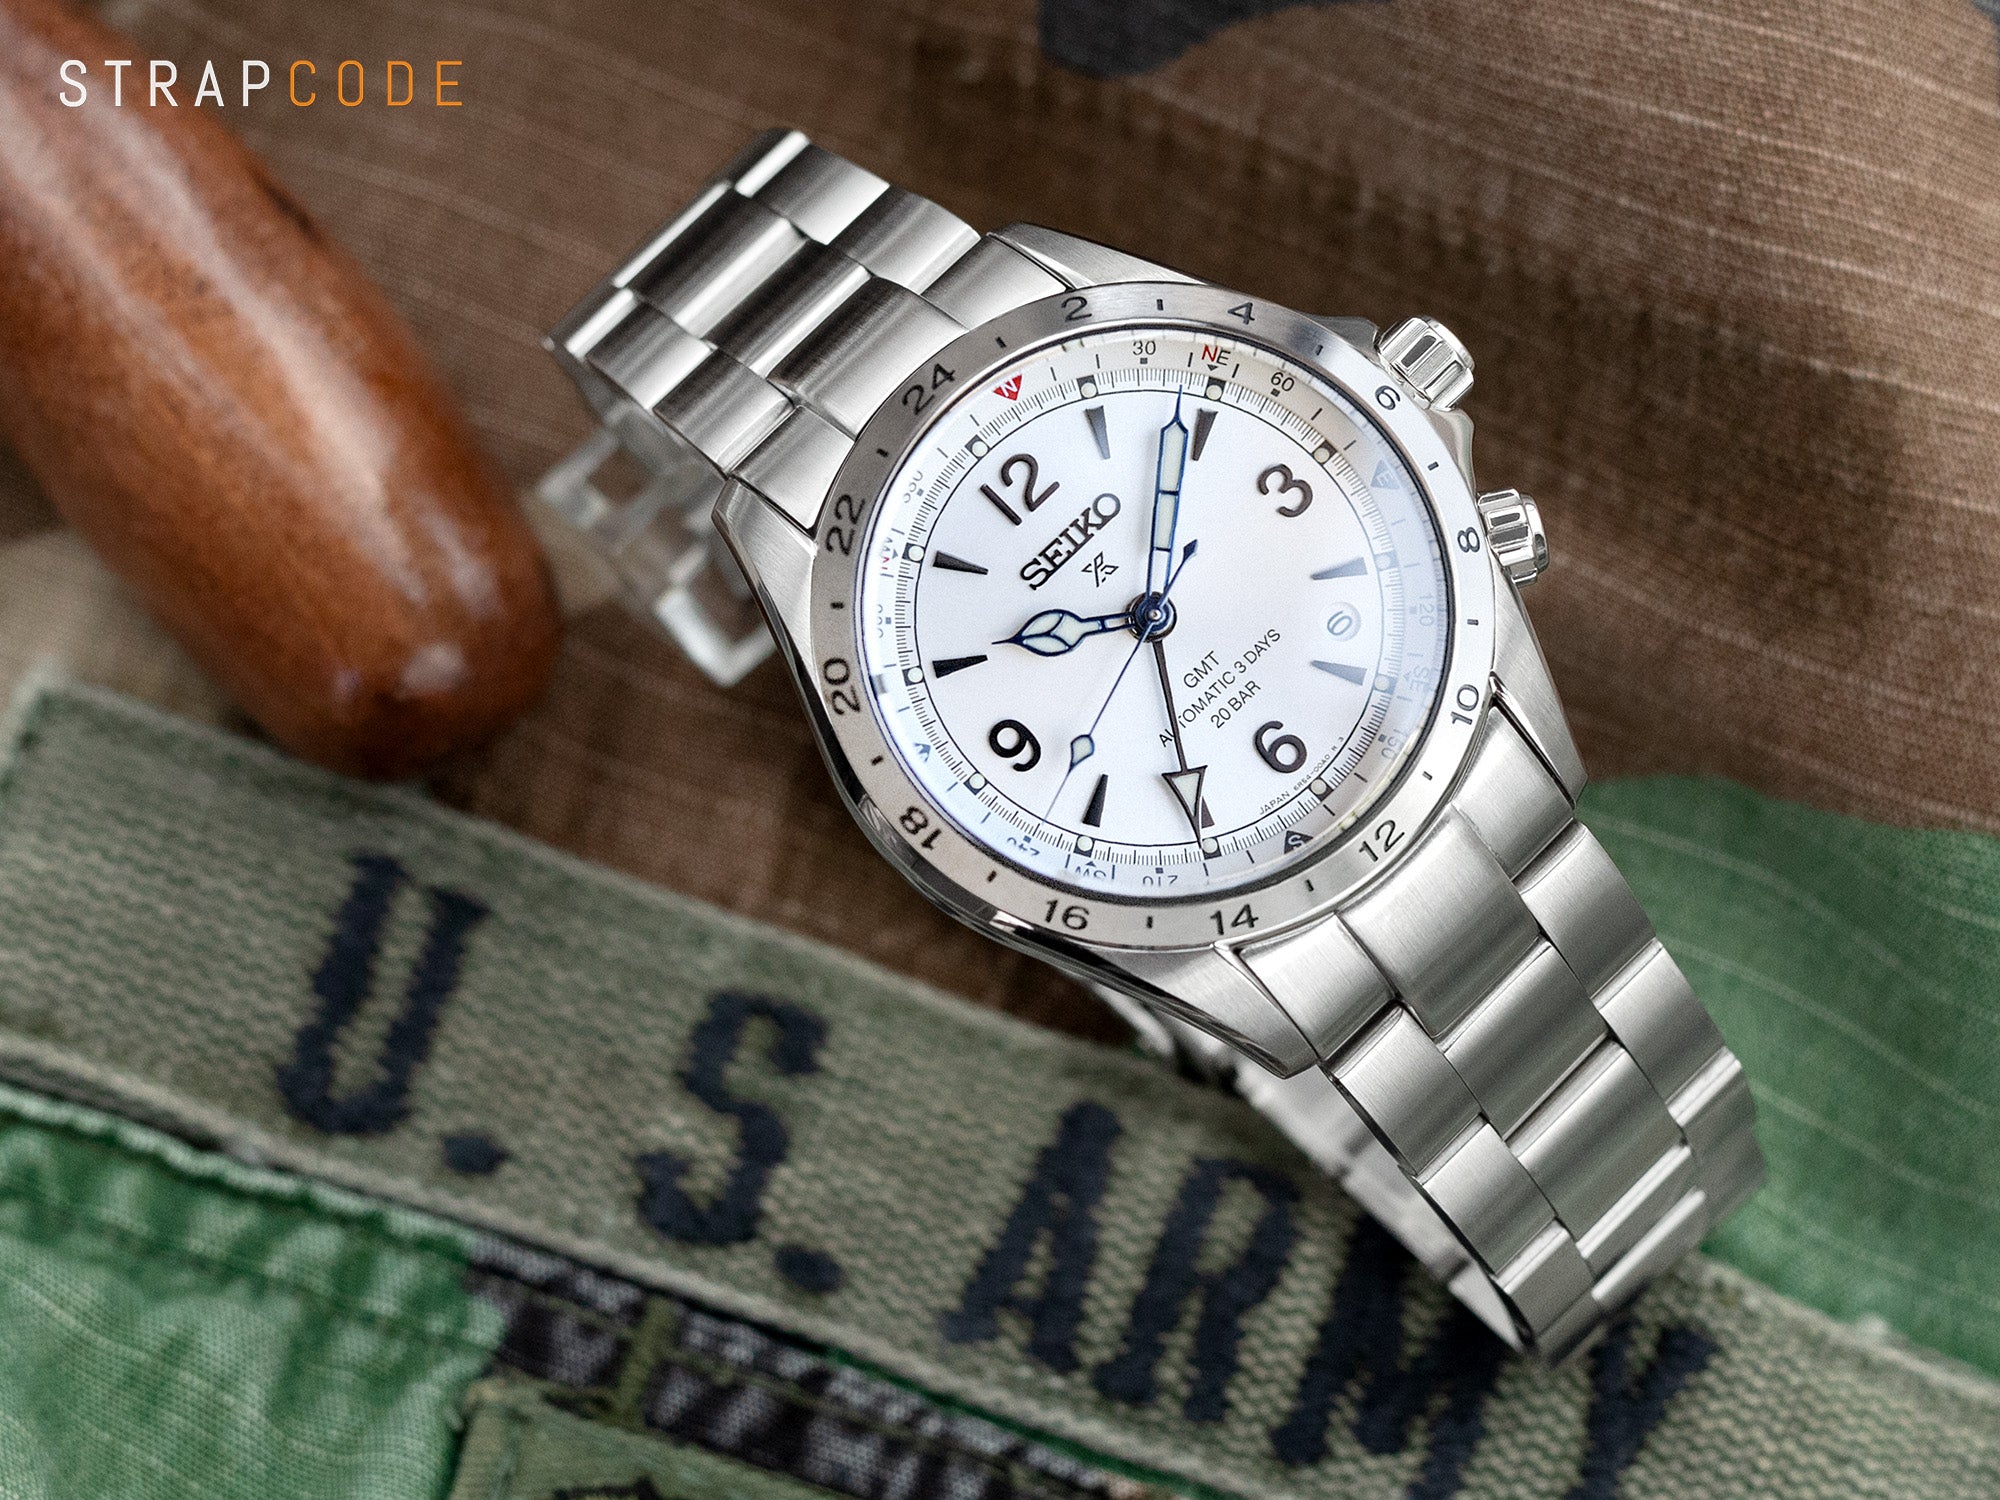 Seiko Alpinist GMT SPB409 White with Strapcode fitted endlink stainless steel watch band